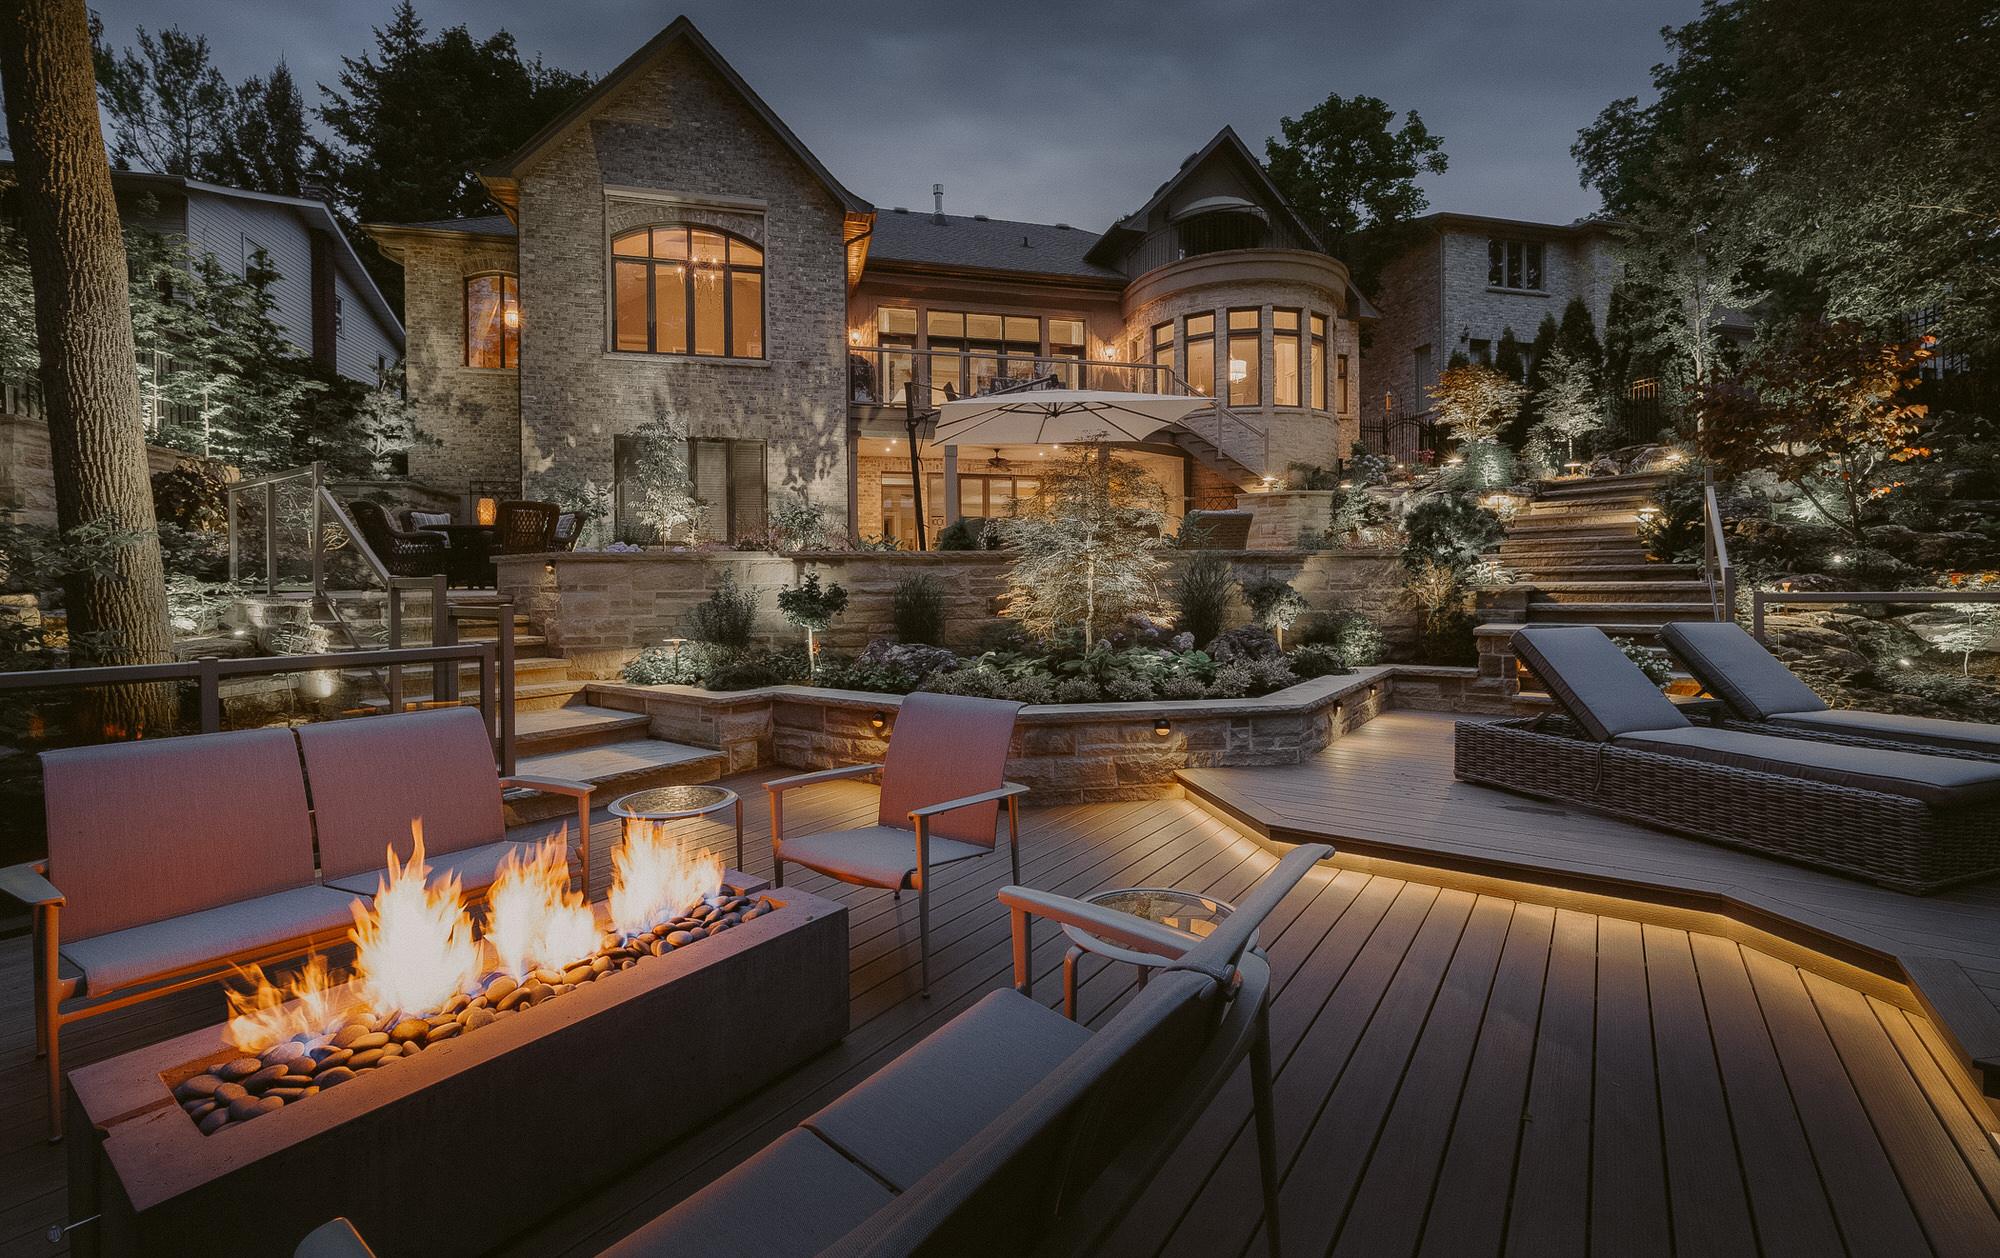 A Dekko Avera concrete fire pit in the middle of gray patio furniture in front of a stone two-story home with an abundance of foliage in the yard.